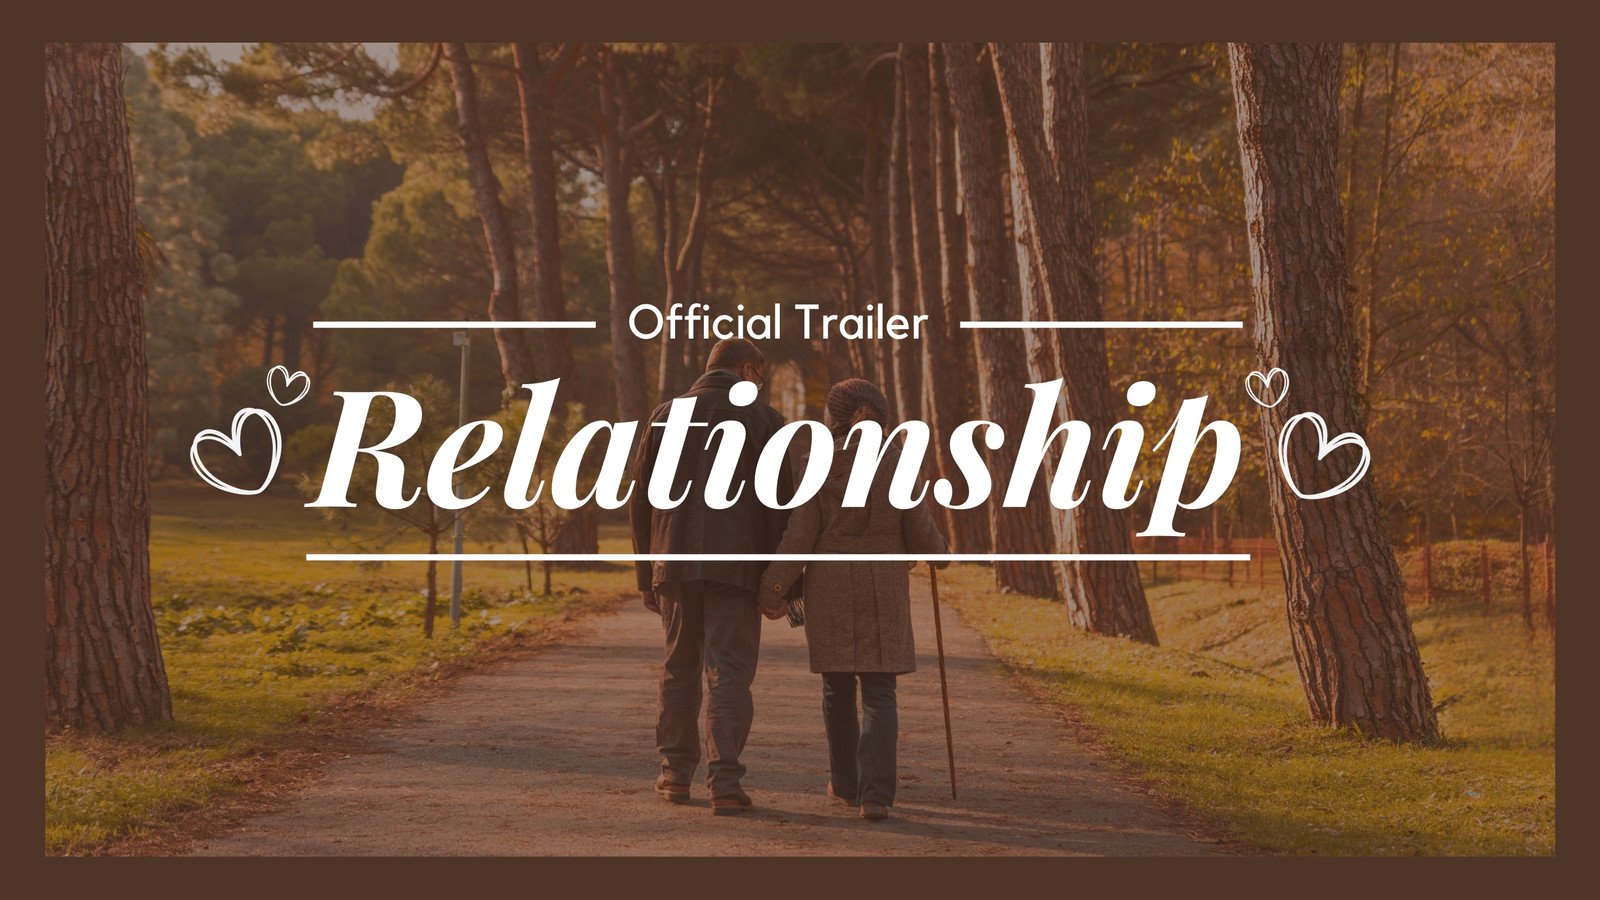 Brown Modern Official Trailer Relationship Youtube Thumbnail